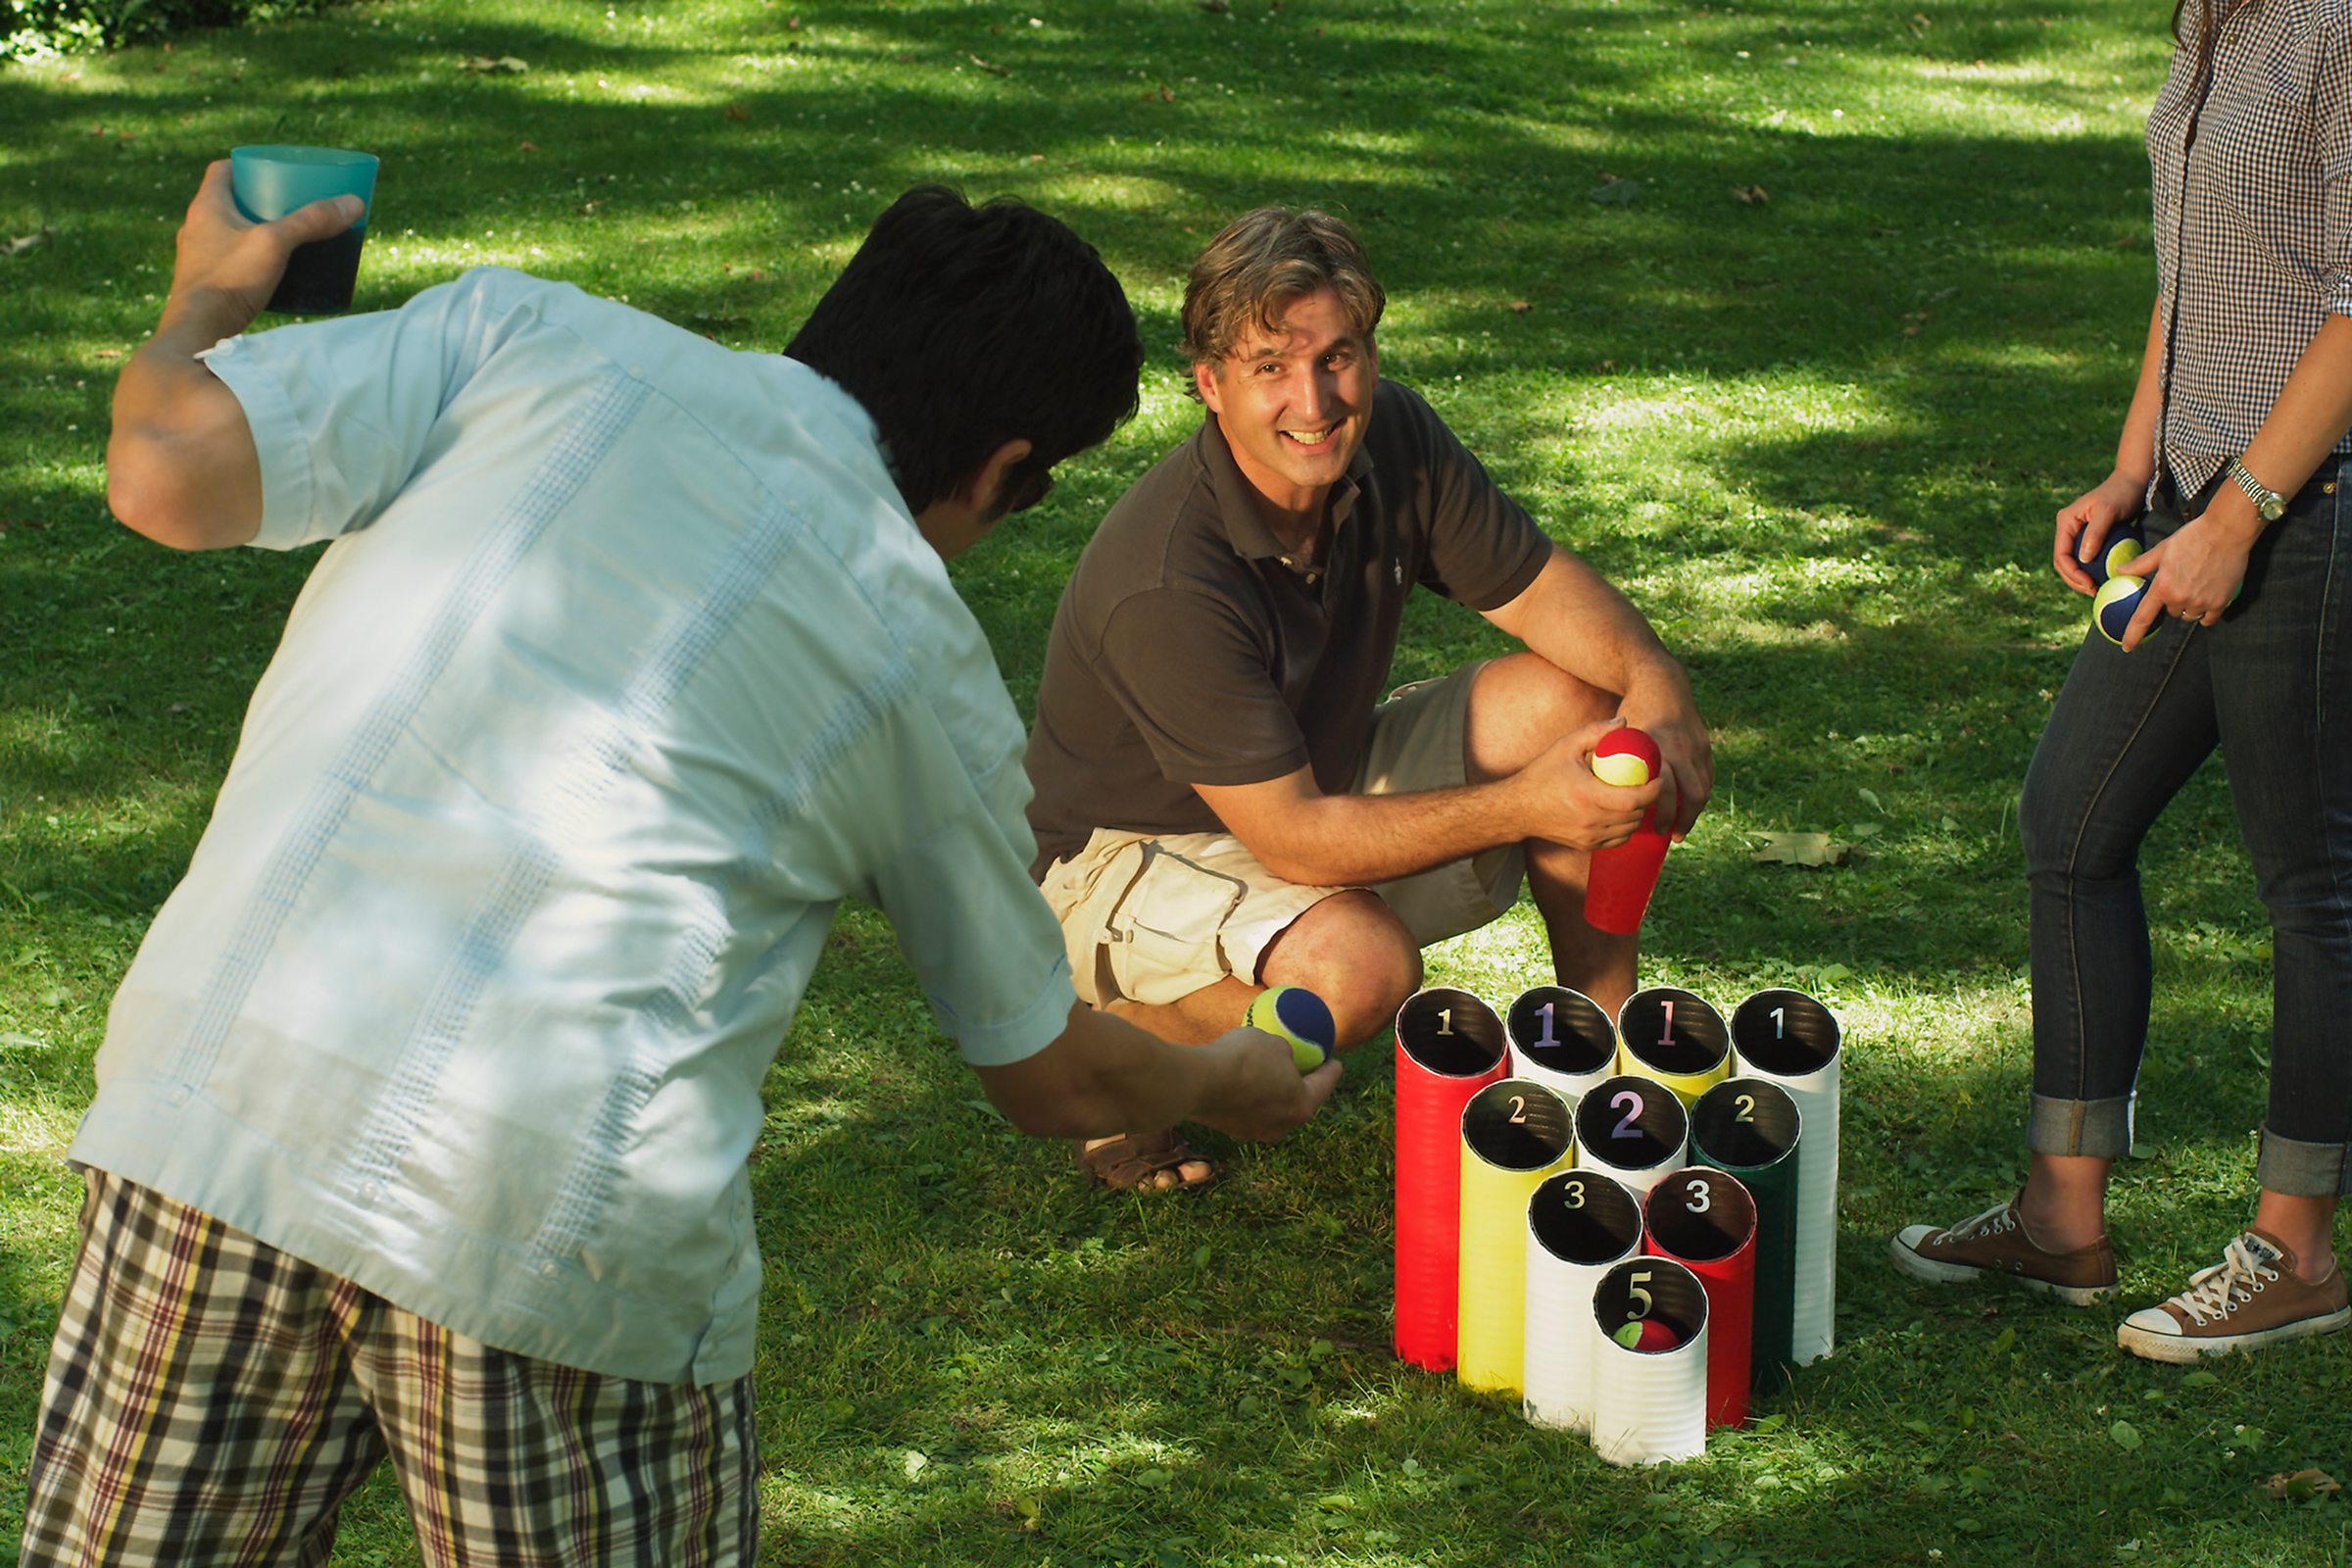 Group of friends playing a pipe ball lawn game